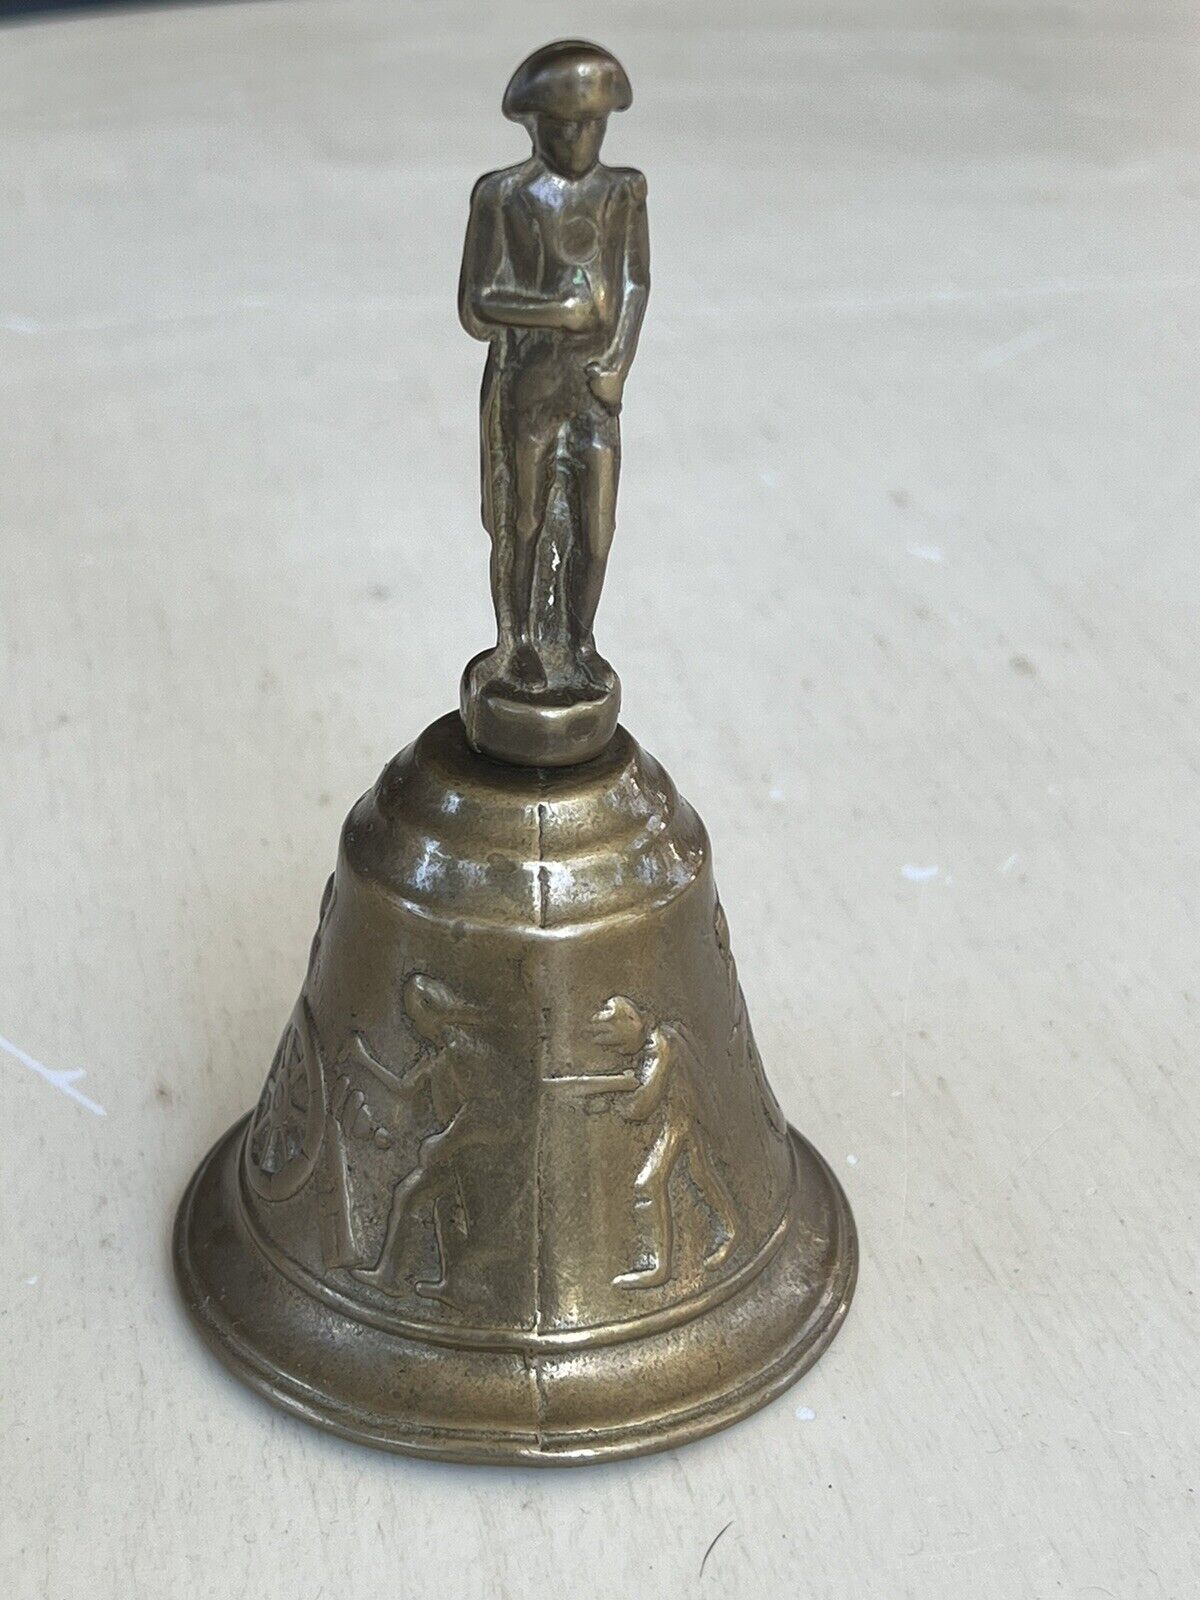 Vintage Napoleon Brass Bell Battle Scene With Soldiers - 5” Tall